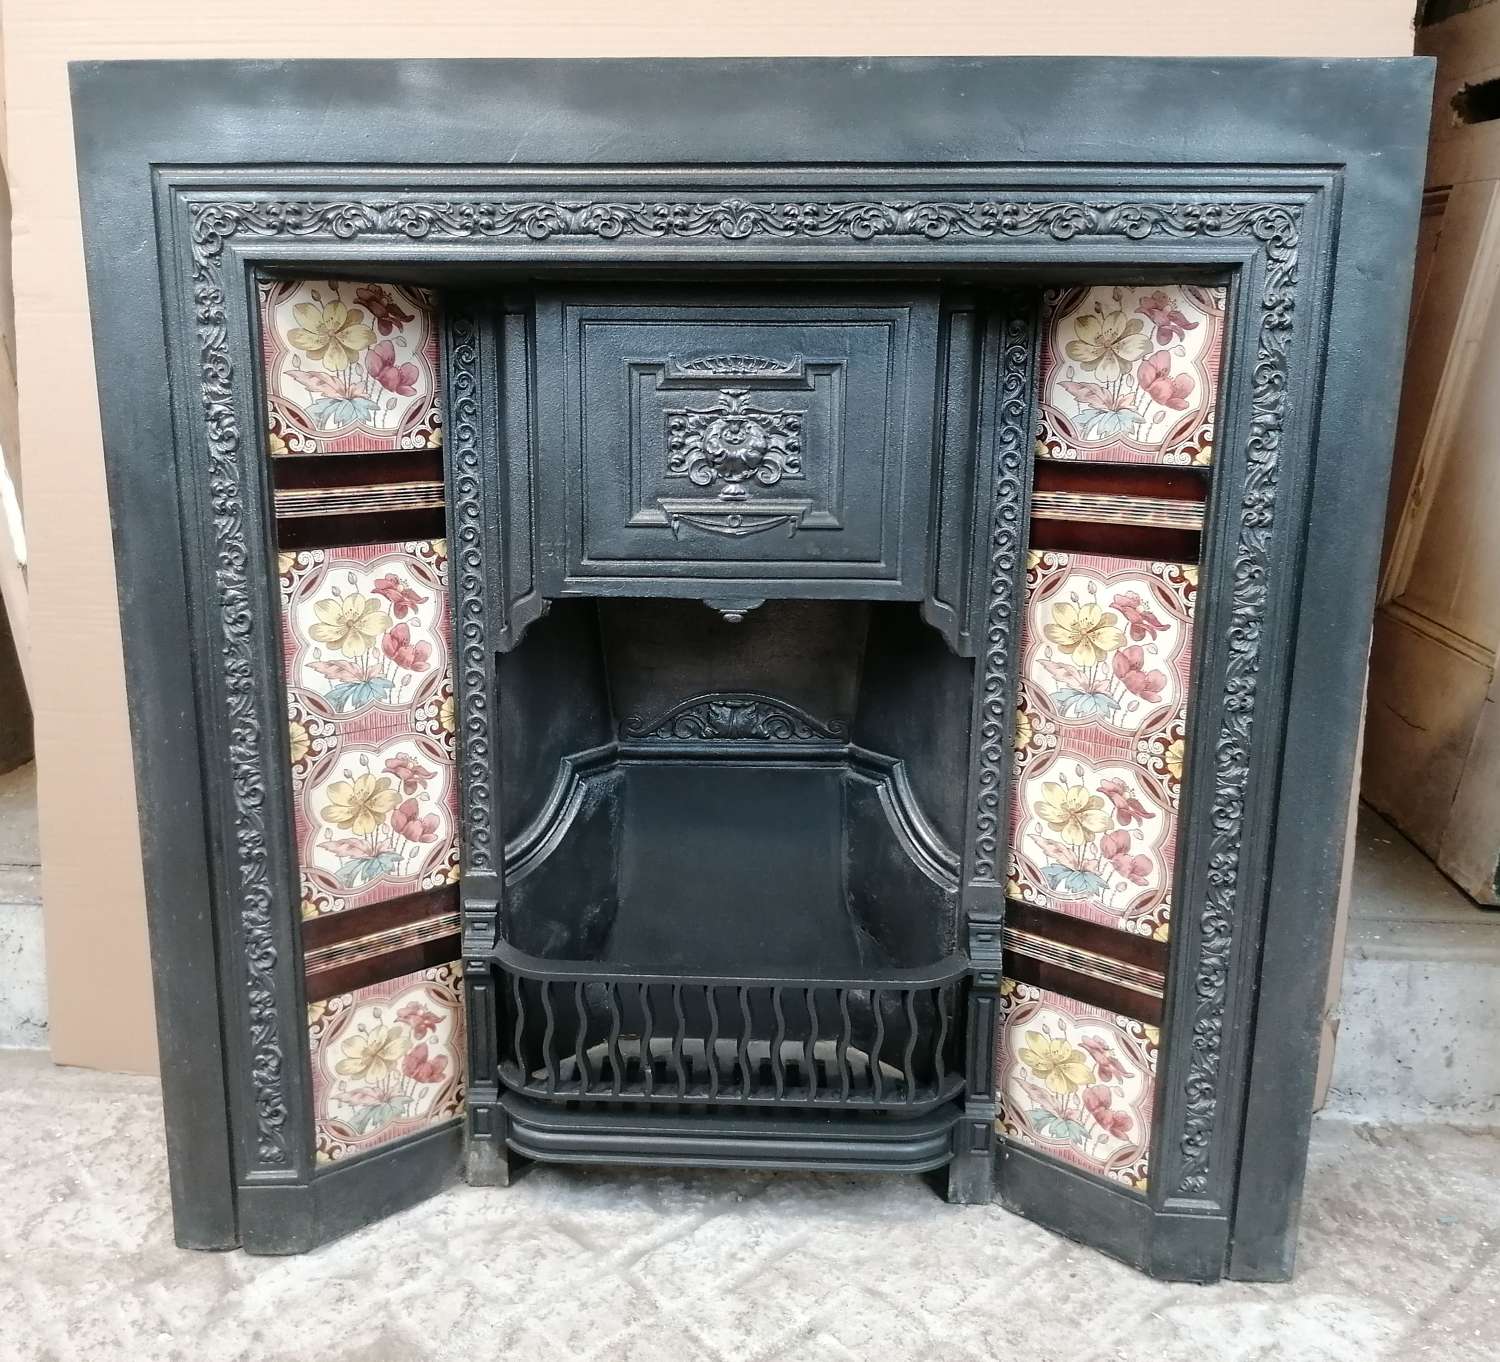 FI0060 A RECLAIMED VINTAGE REPRODUCTION TILED FIRE INSERT